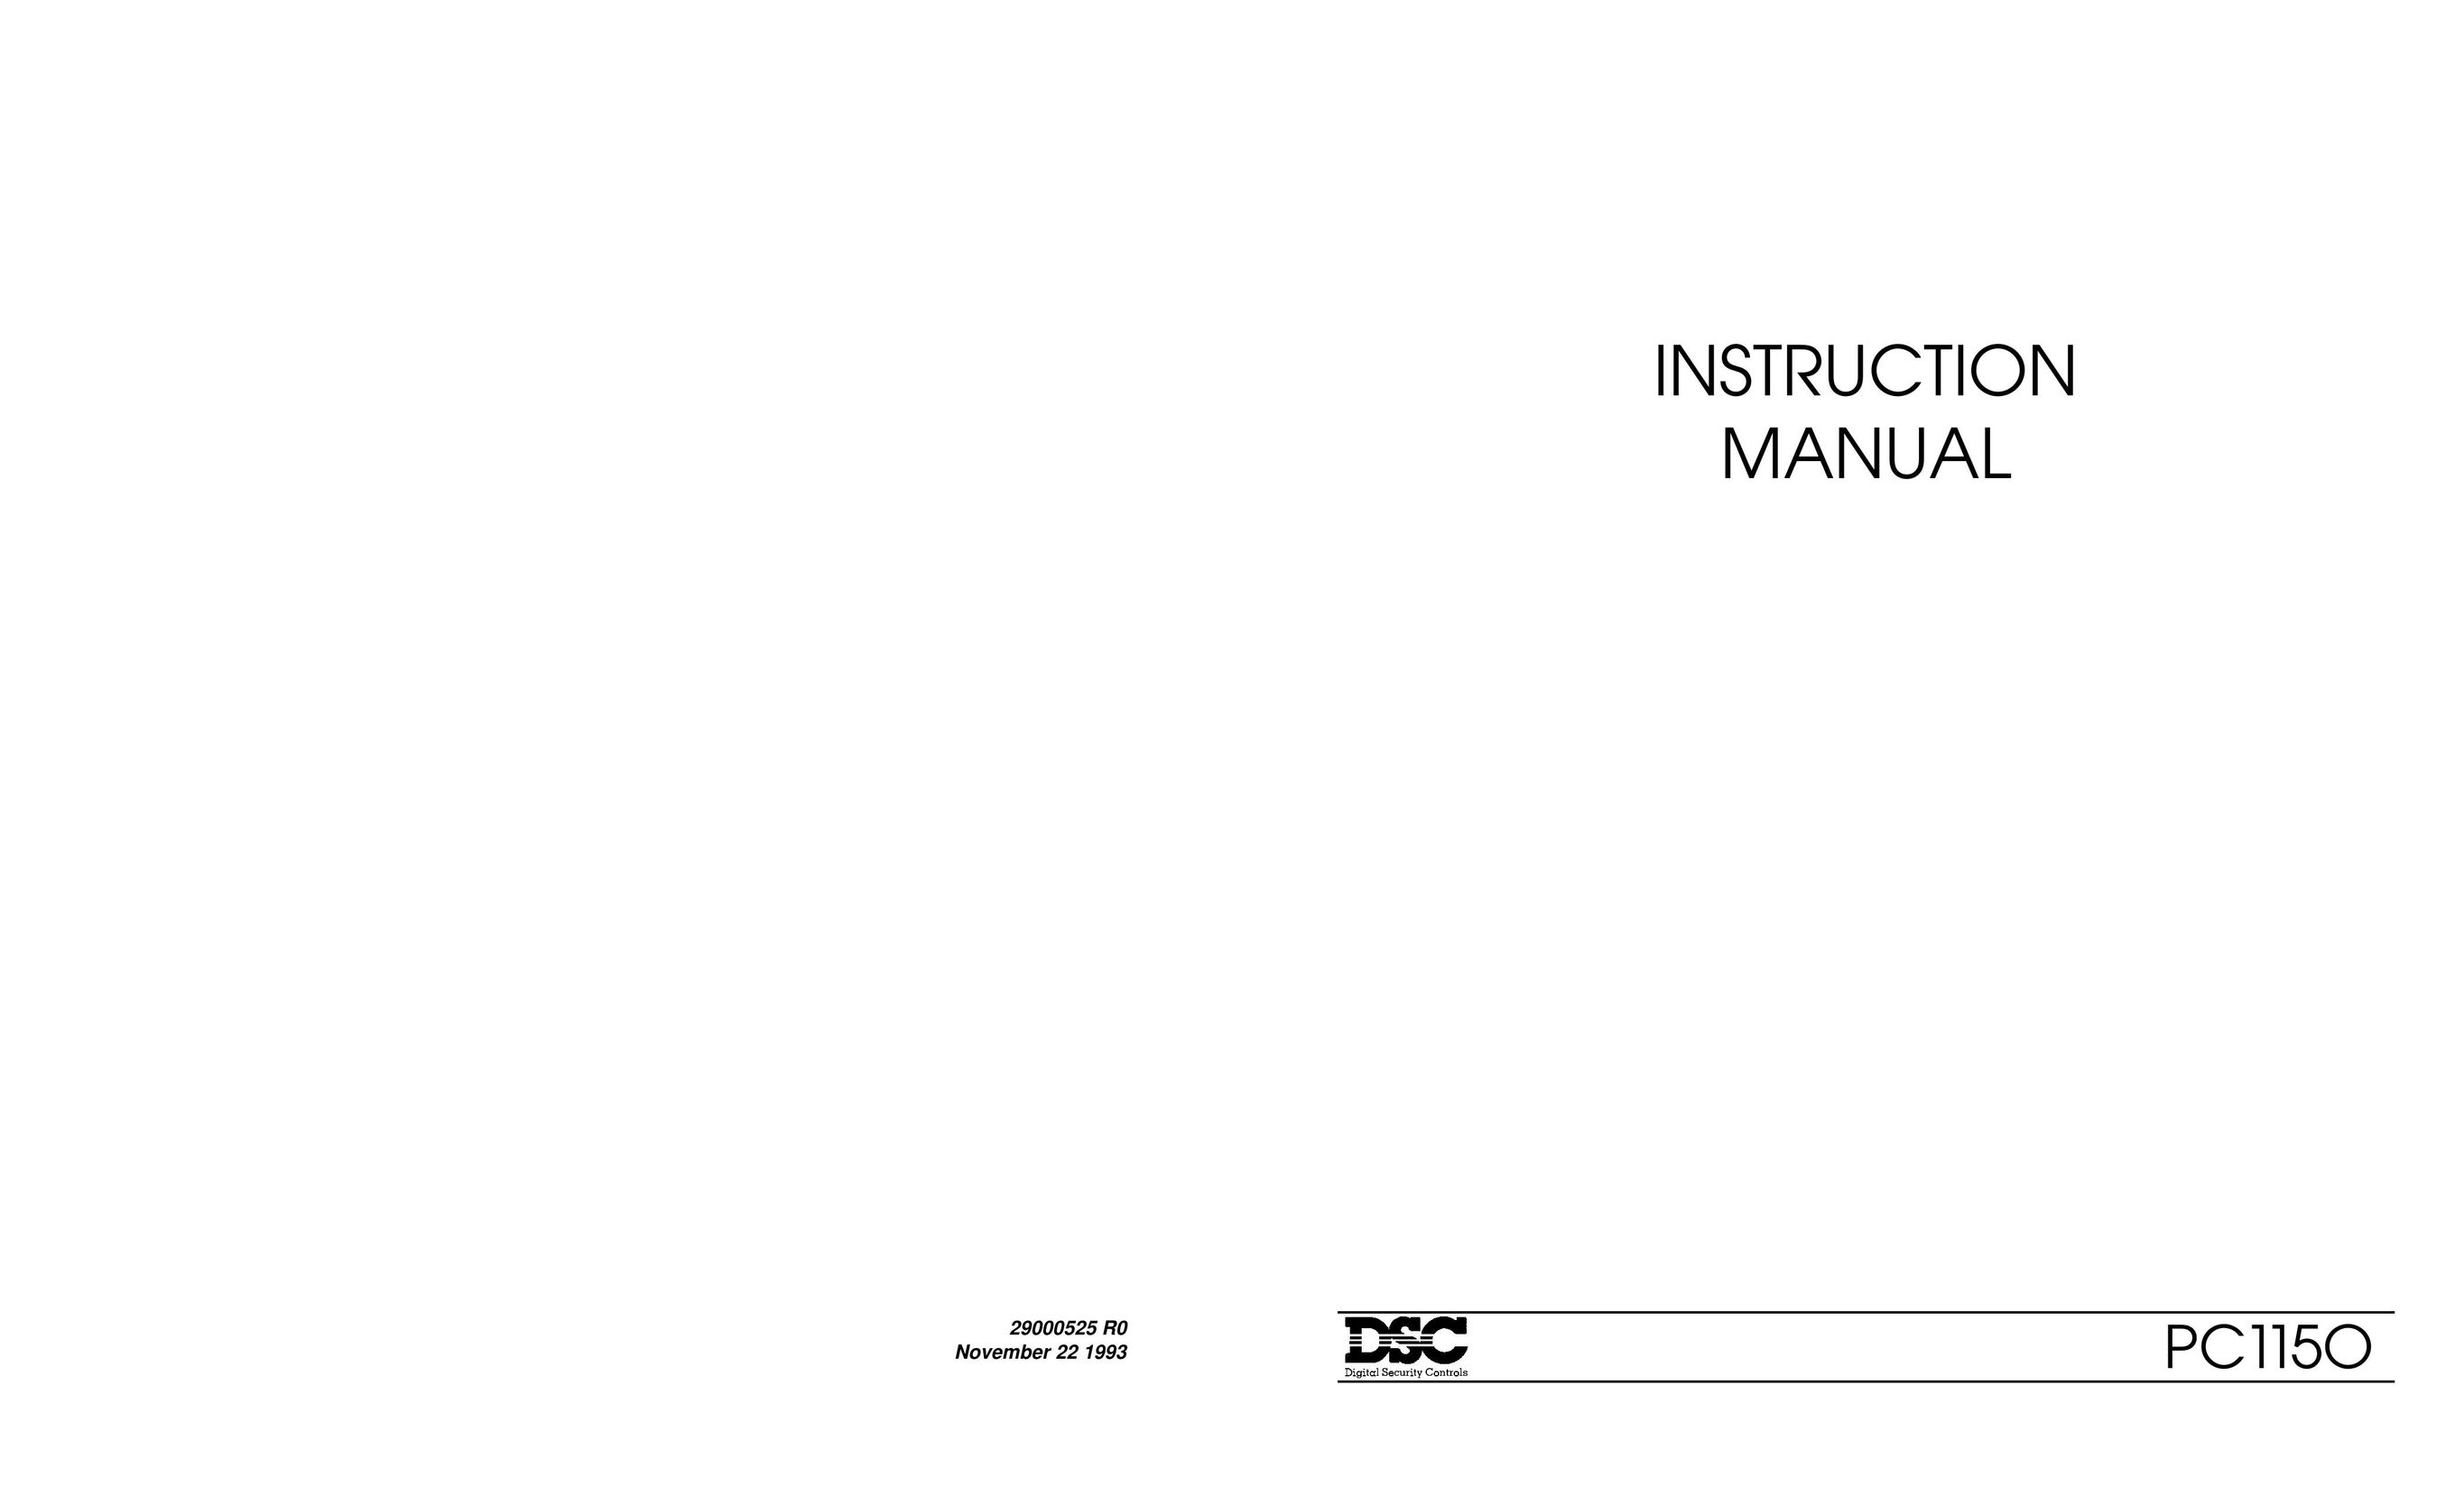 Tyco PC1150 Home Security System User Manual